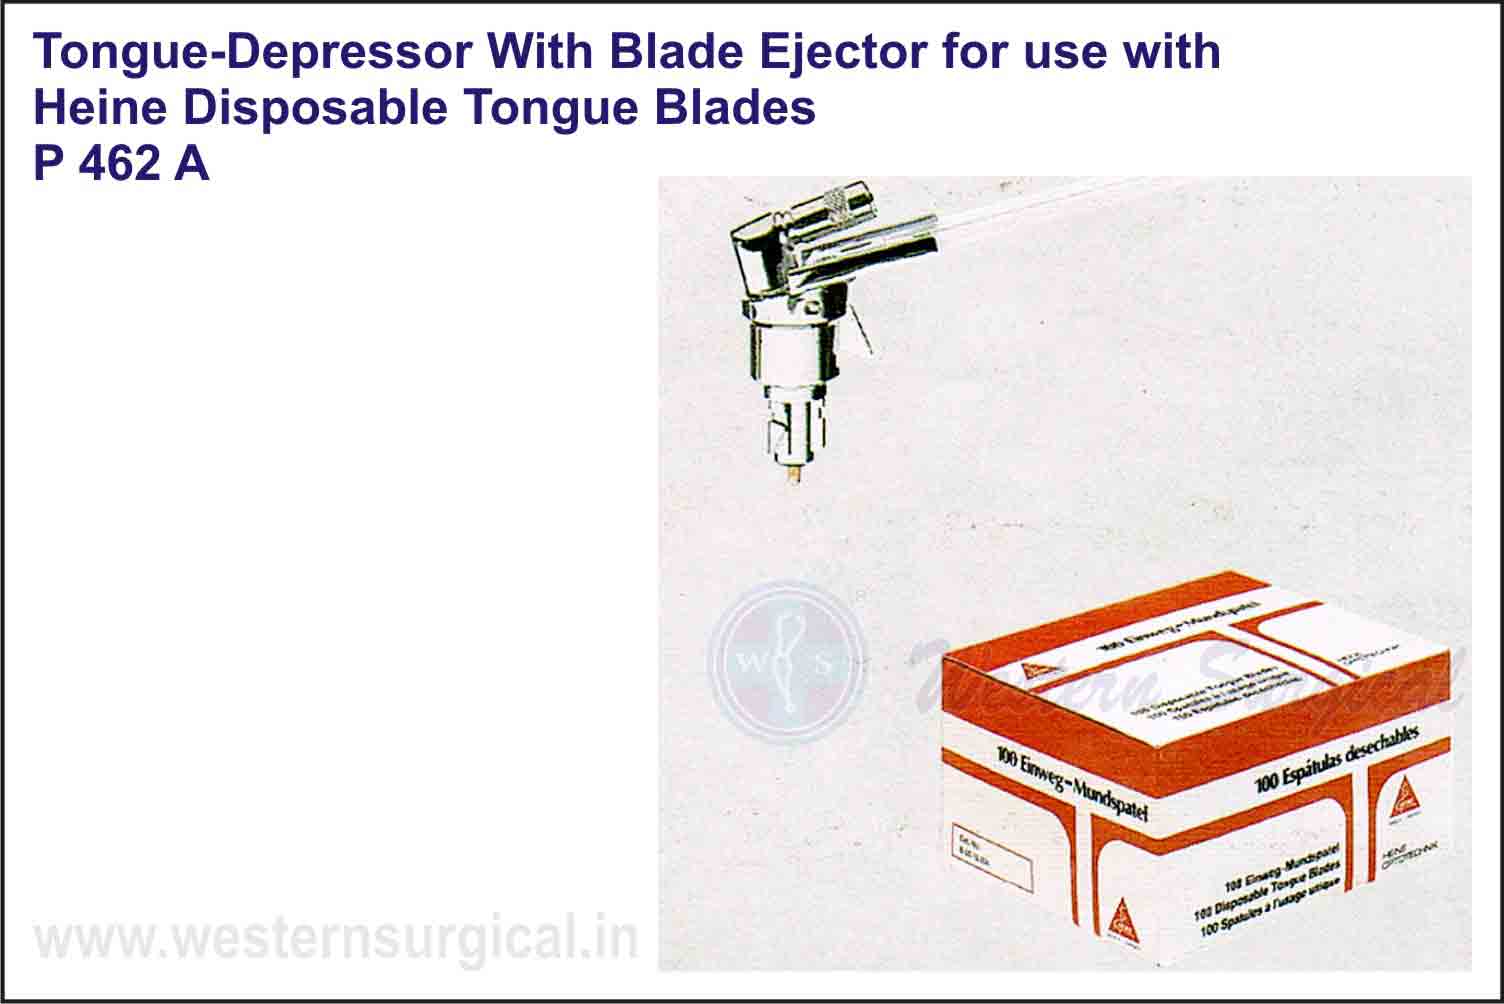 TONGUE DEPRESSOR WITH BLADES EJECTOR FOR USE WITH HEINE DISPOSABLE TONGUE BLADES